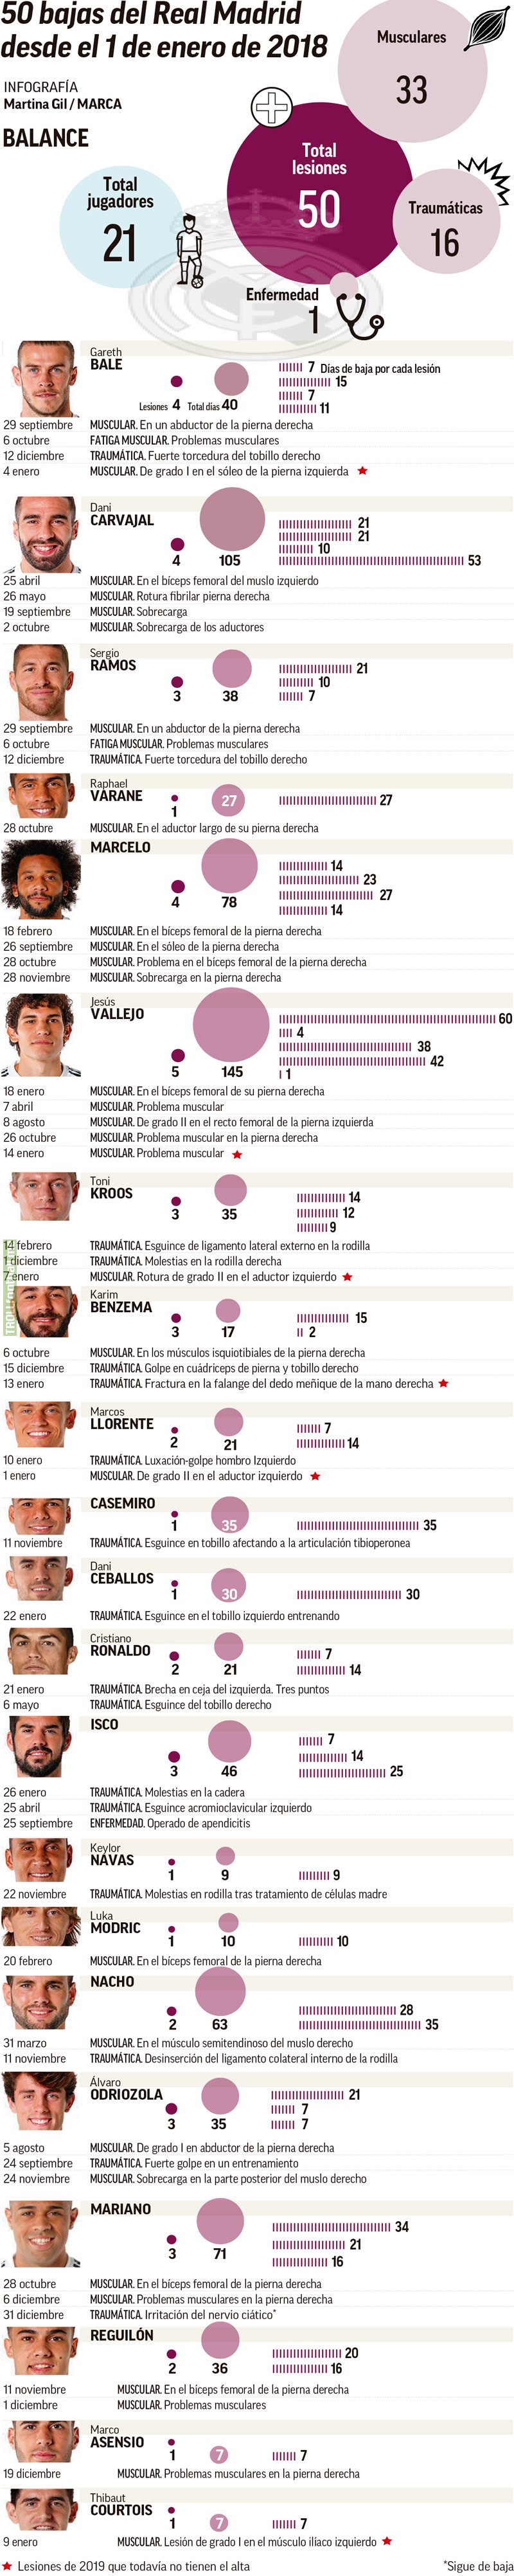 [MARCA Infographic] Both Mariano and Vallejo [Real Madrid] trained with a team on Monday... to be injured again. Already this season, the European champs have been hit with 33 injuries and 24 of those have been muscular. 50 injuries in 2018 to 21 players.